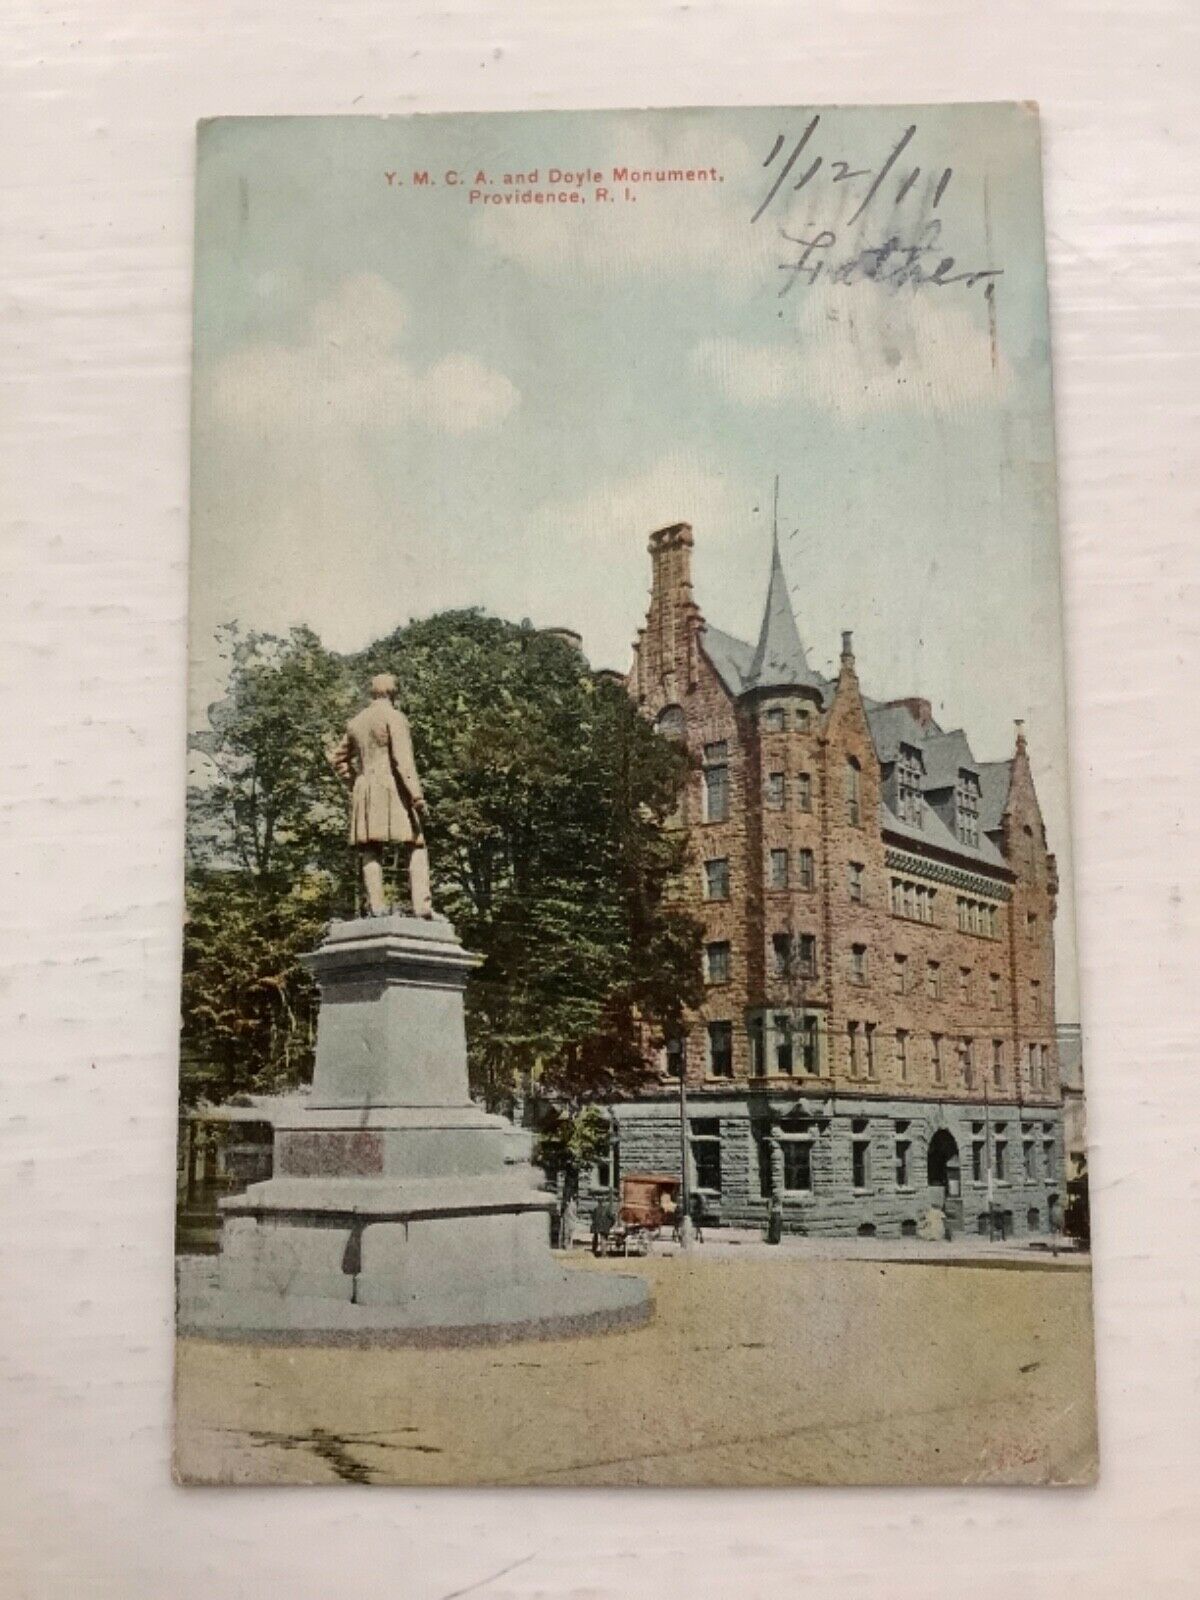 Ymca And Doyle Monument Providence Ri Postcard Antique Vintage